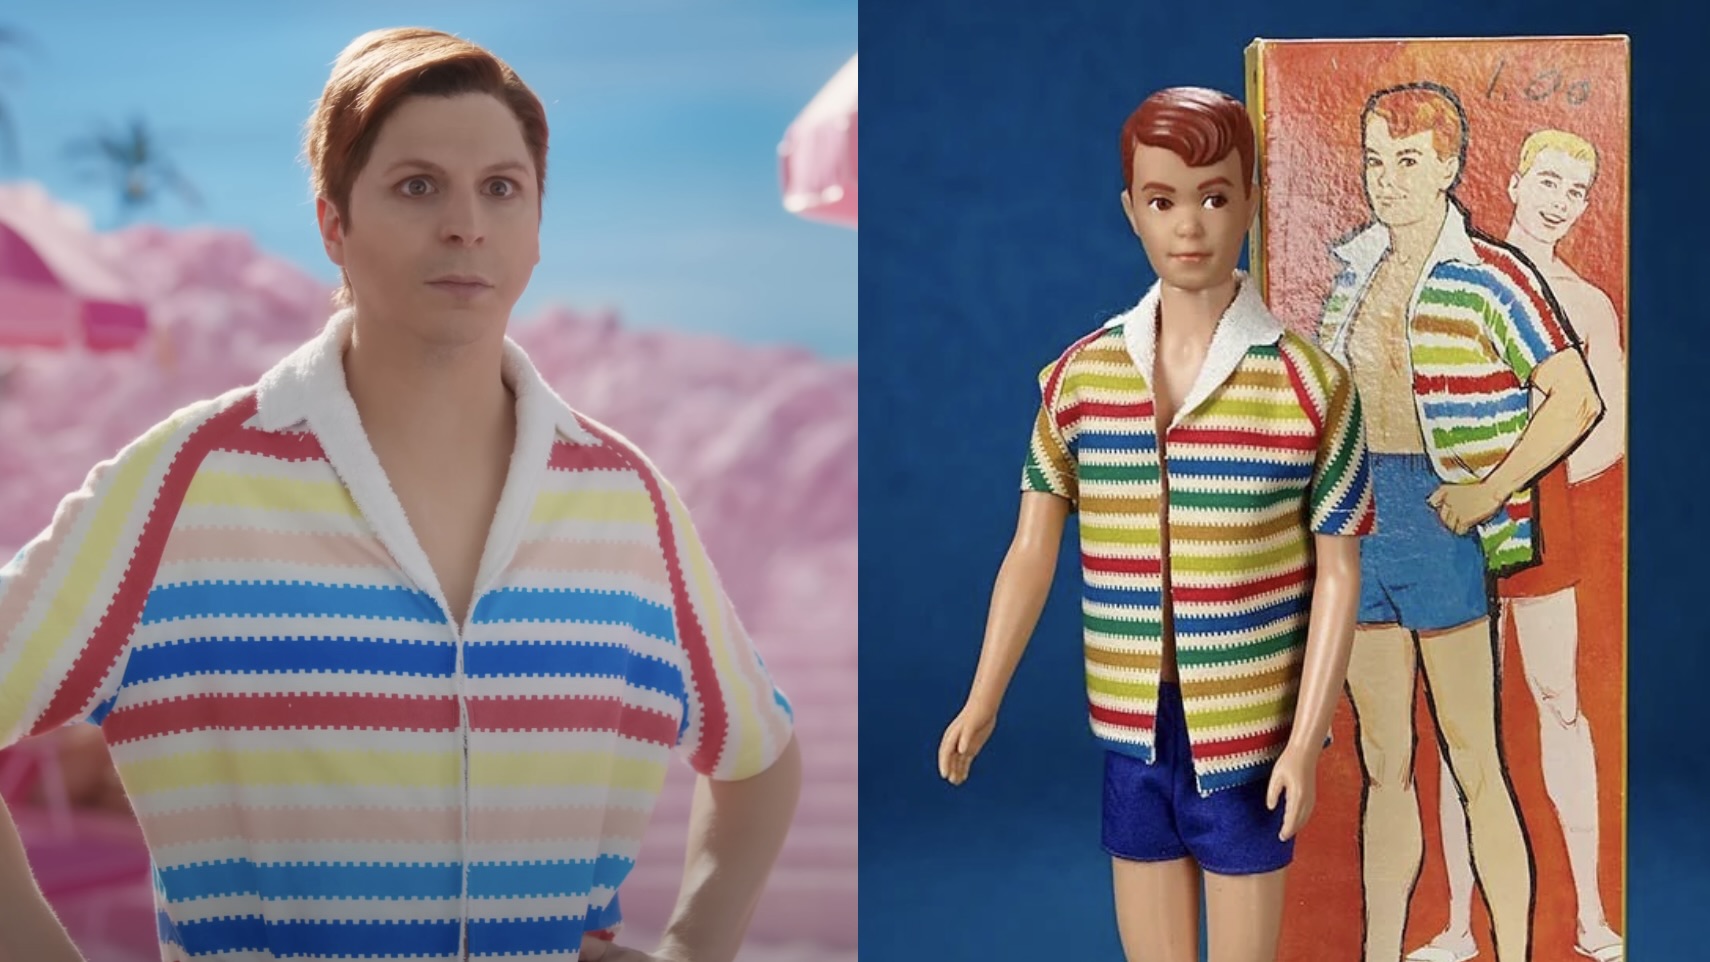 Barbie: The queer-coded coming out story of Ken's 'buddy' Allan